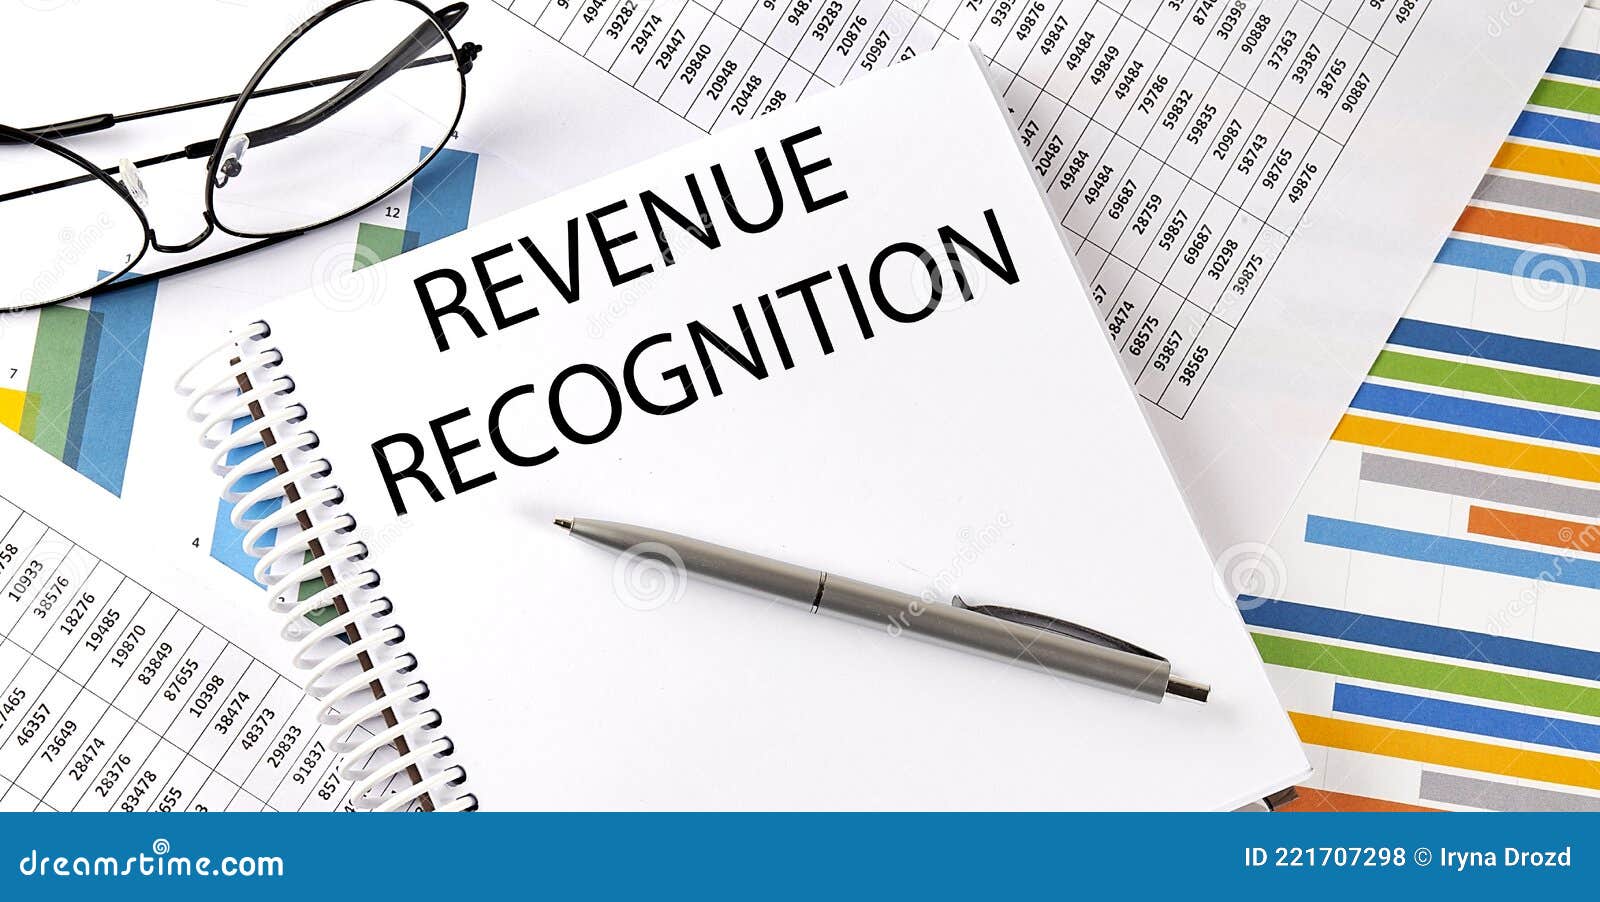 revenue-recognition-pen-and-glasses-on-the-chart-business-concept